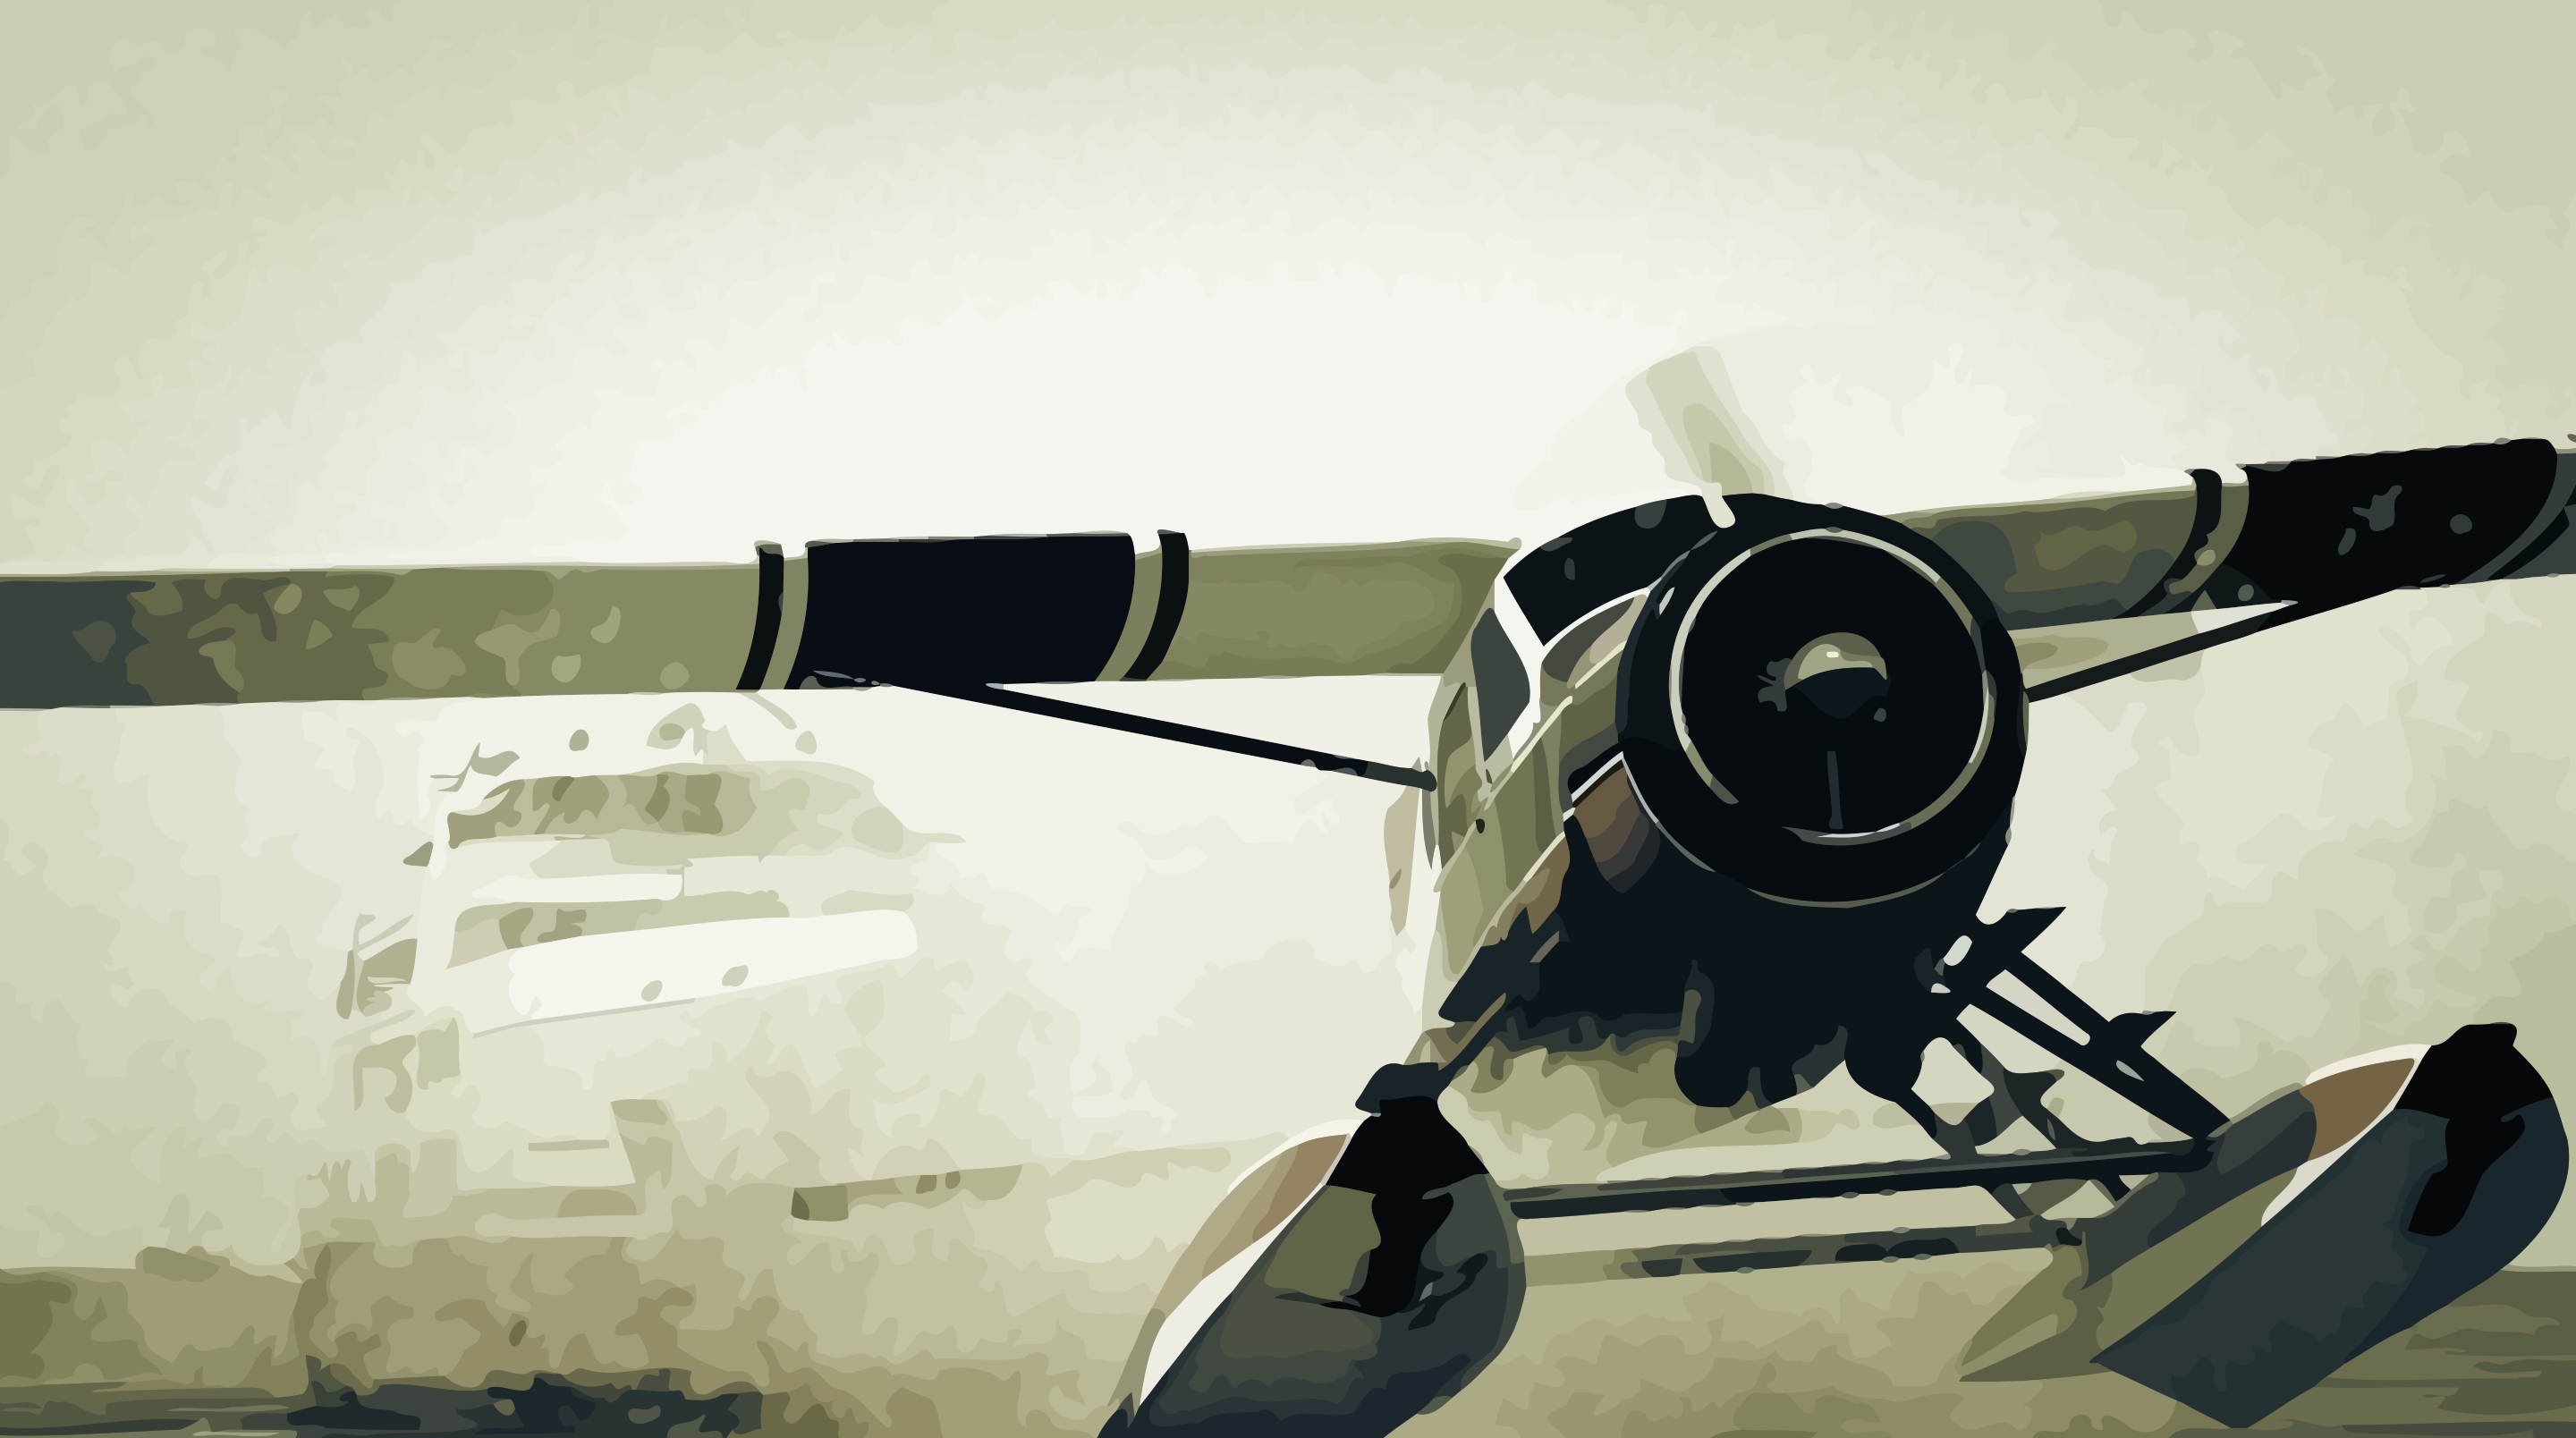 General 2880x1608 vehicle airplane Grand Theft Auto V